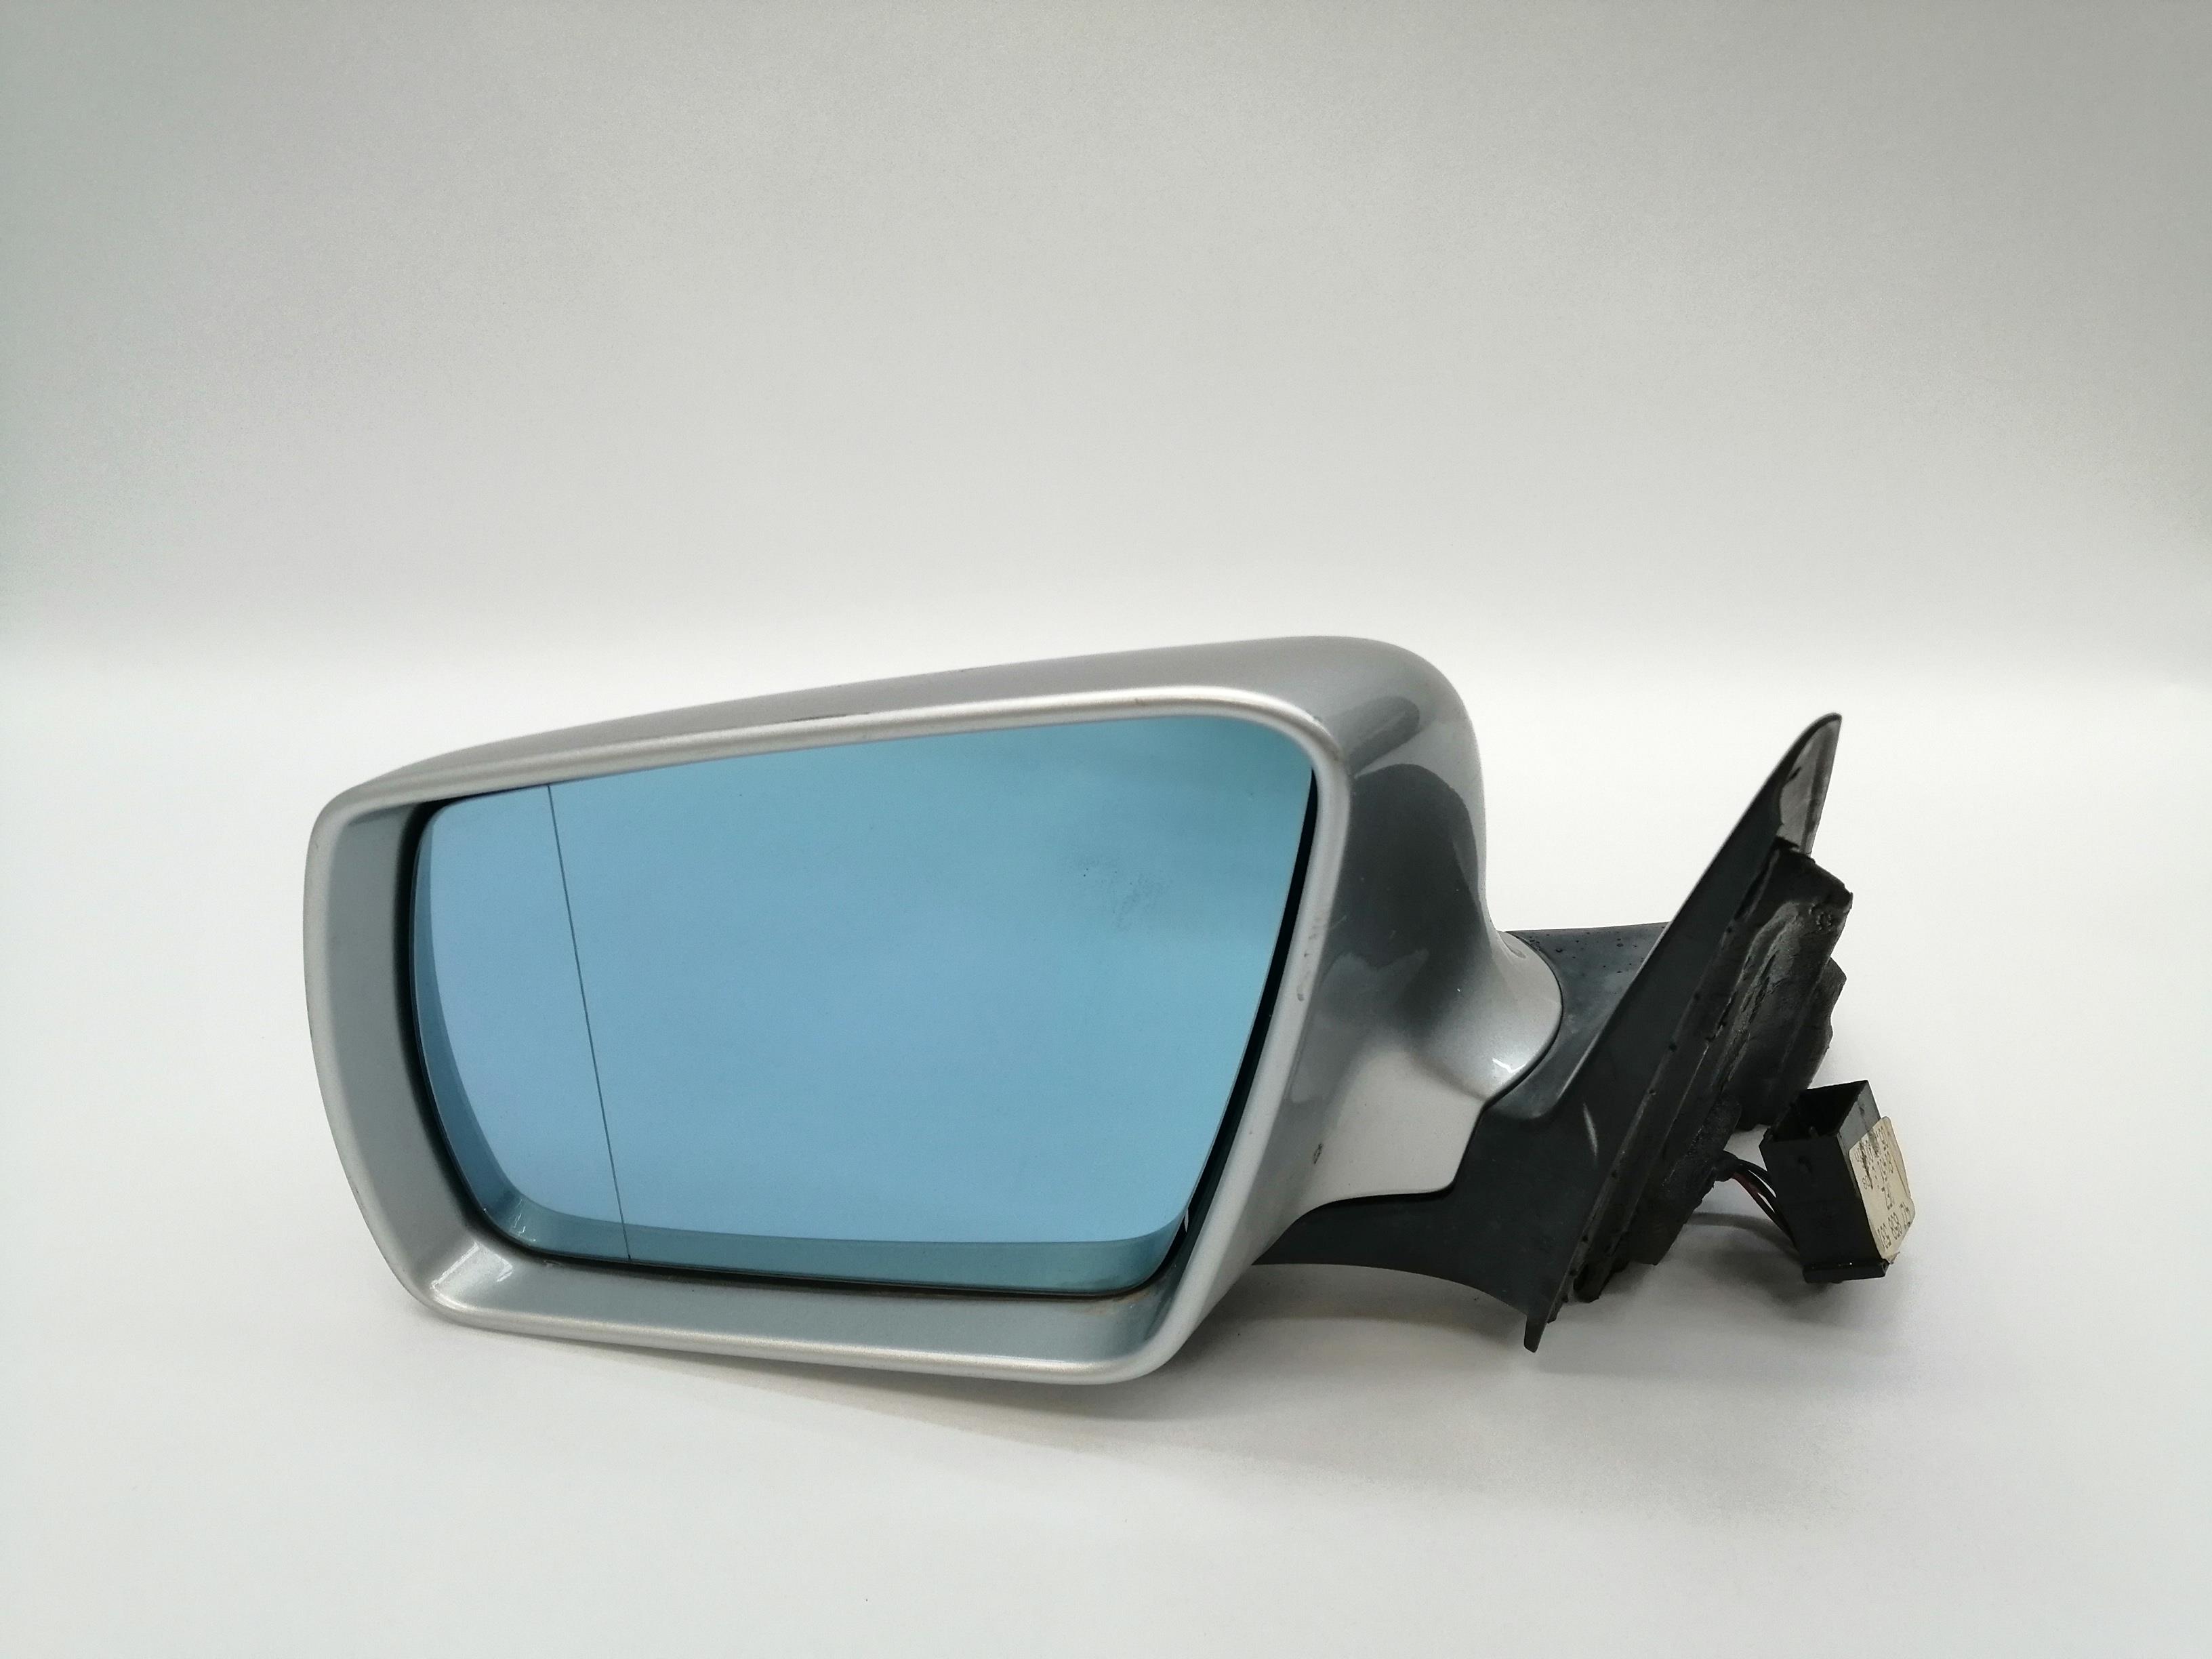 AUDI A6 allroad C5 (2000-2006) Left Side Wing Mirror 4Z7858531A 24022766